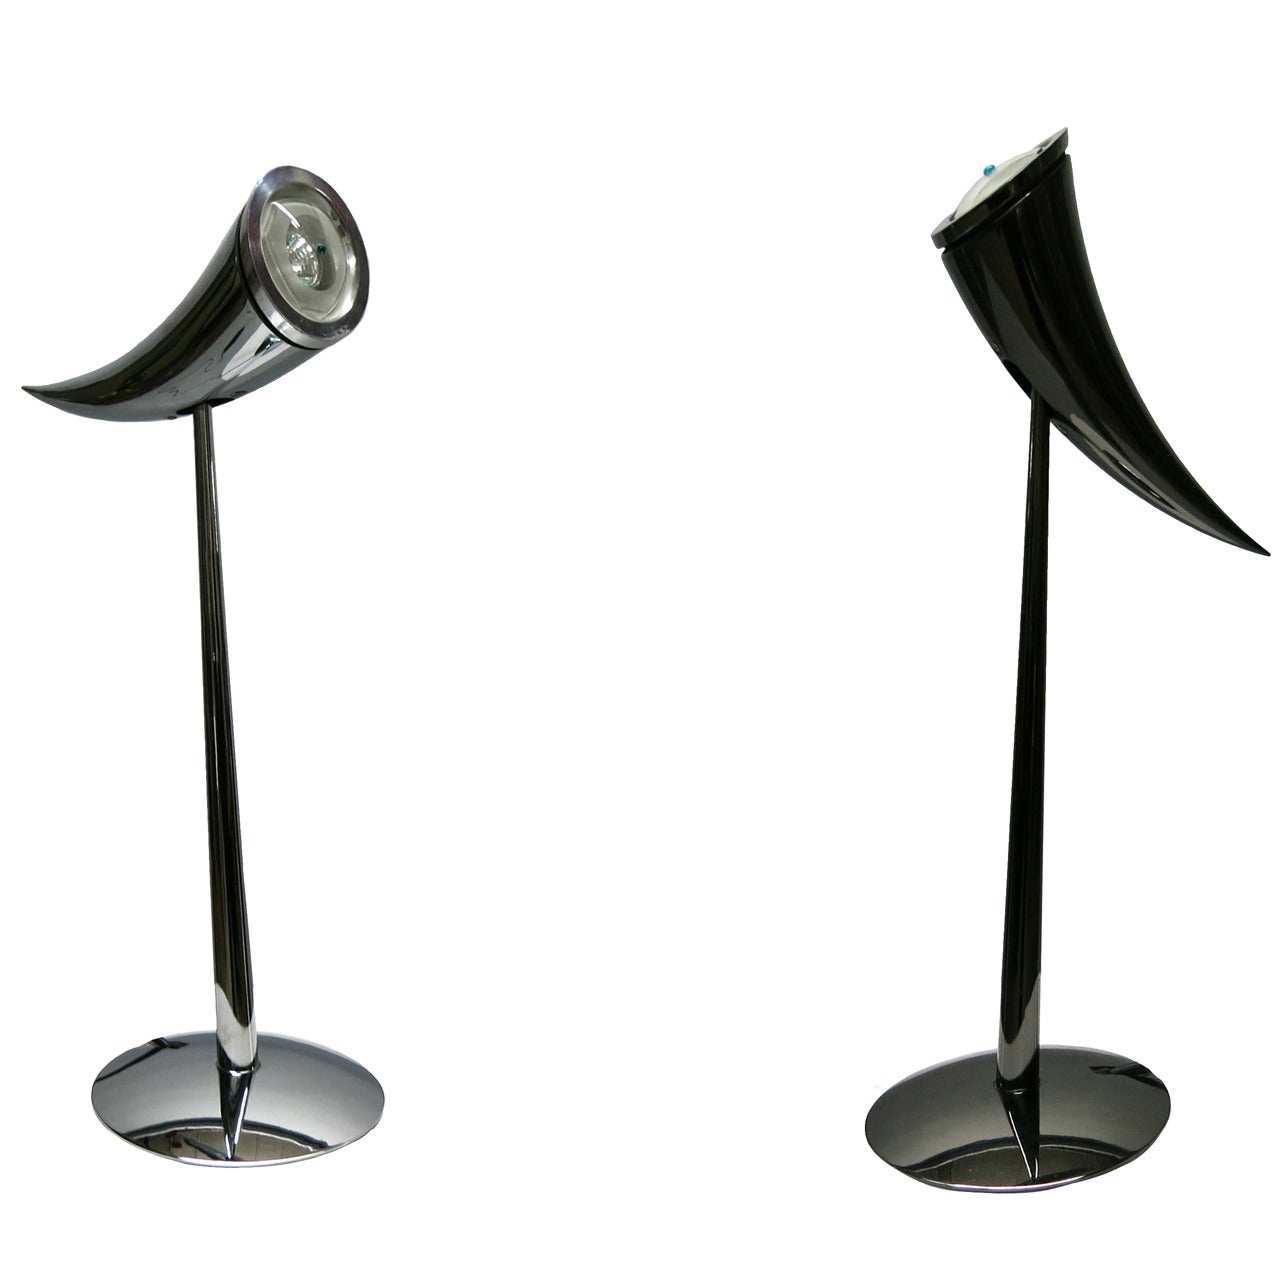 Pair of Original Ara Table Lamps by Phillpe Starck for Flos, 1988, France For Sale